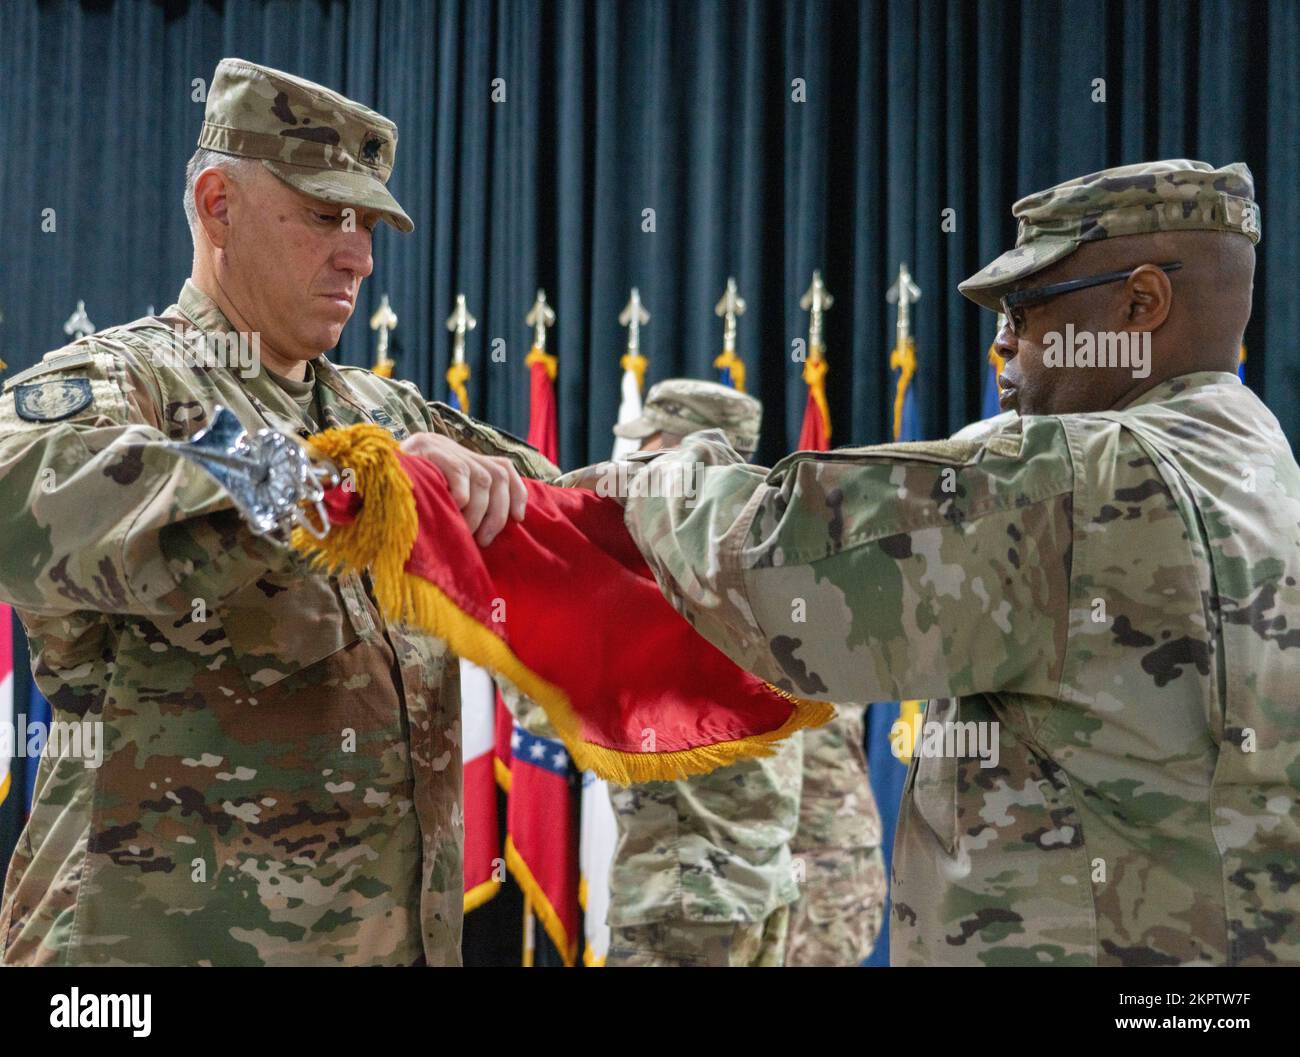 U.S. Army Lt. Col. Rene Martinez, commander of the 36th Special Troops Battalion and Command Sgt. Maj. Charles Bouyer, senior enlisted advisor to Martinez, case their battalion’s flag during a transfer of authority ceremony, Nov. 3, 2022, at Camp Arifjan, Kuwait. The transfer of authority ceremony signifies the end of the responsibilities of Task Force Phoenix followed by the assumption of responsibility by Task Force Hellfighter. Stock Photo